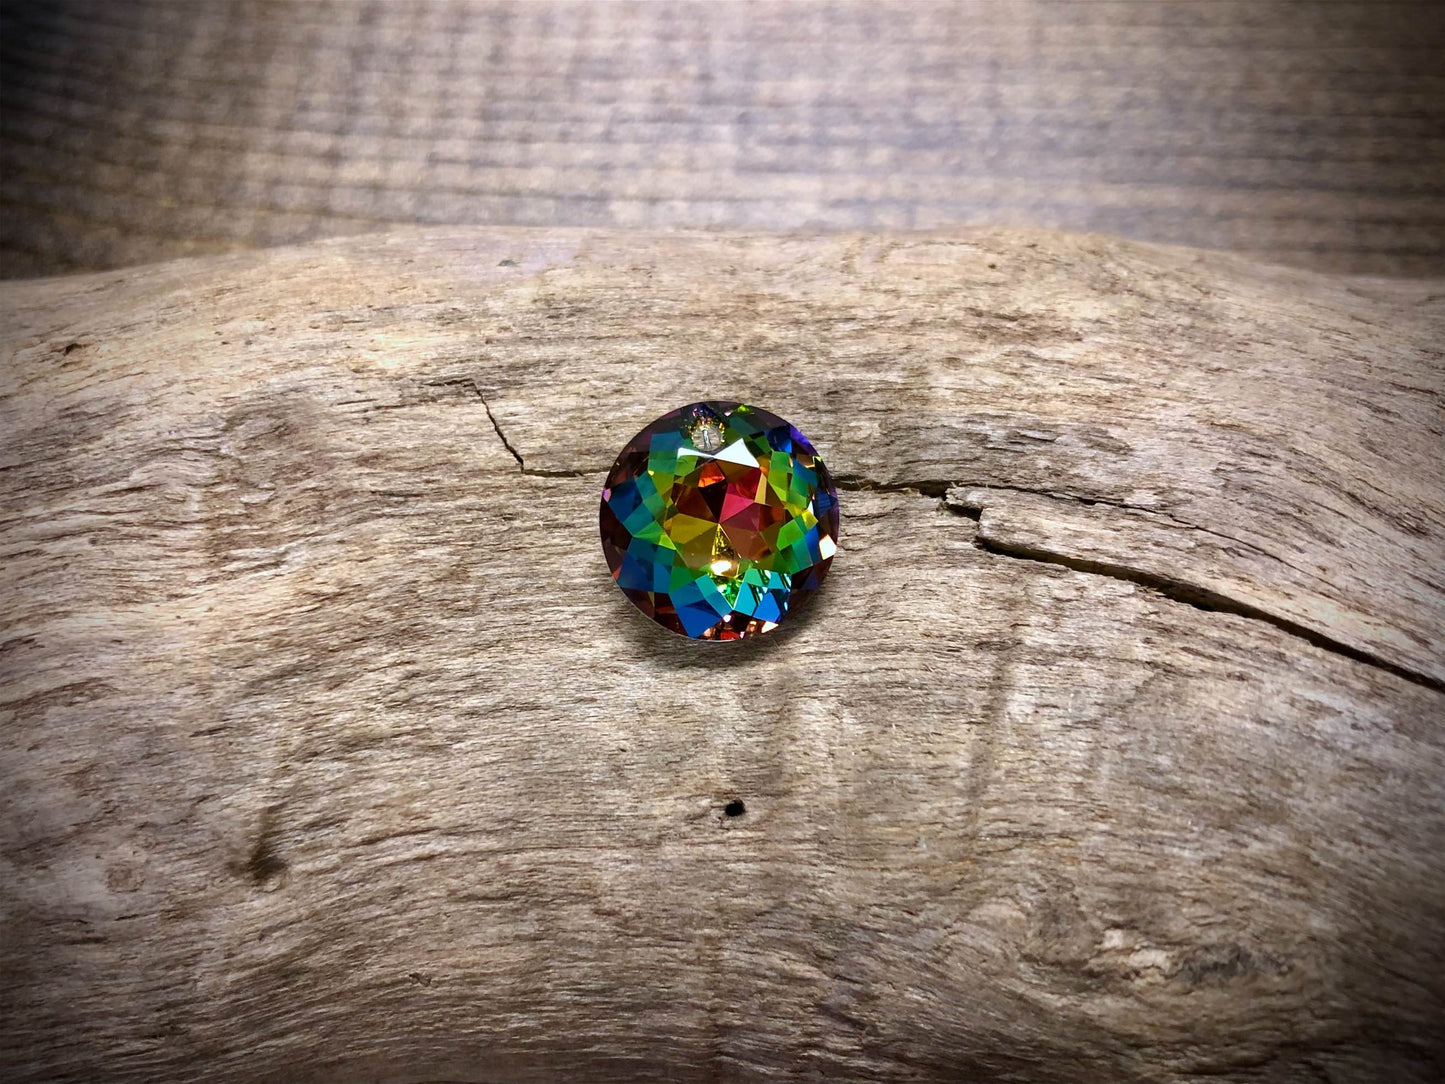 European Crystal Faceted Round Pendant - Bright Rainbow